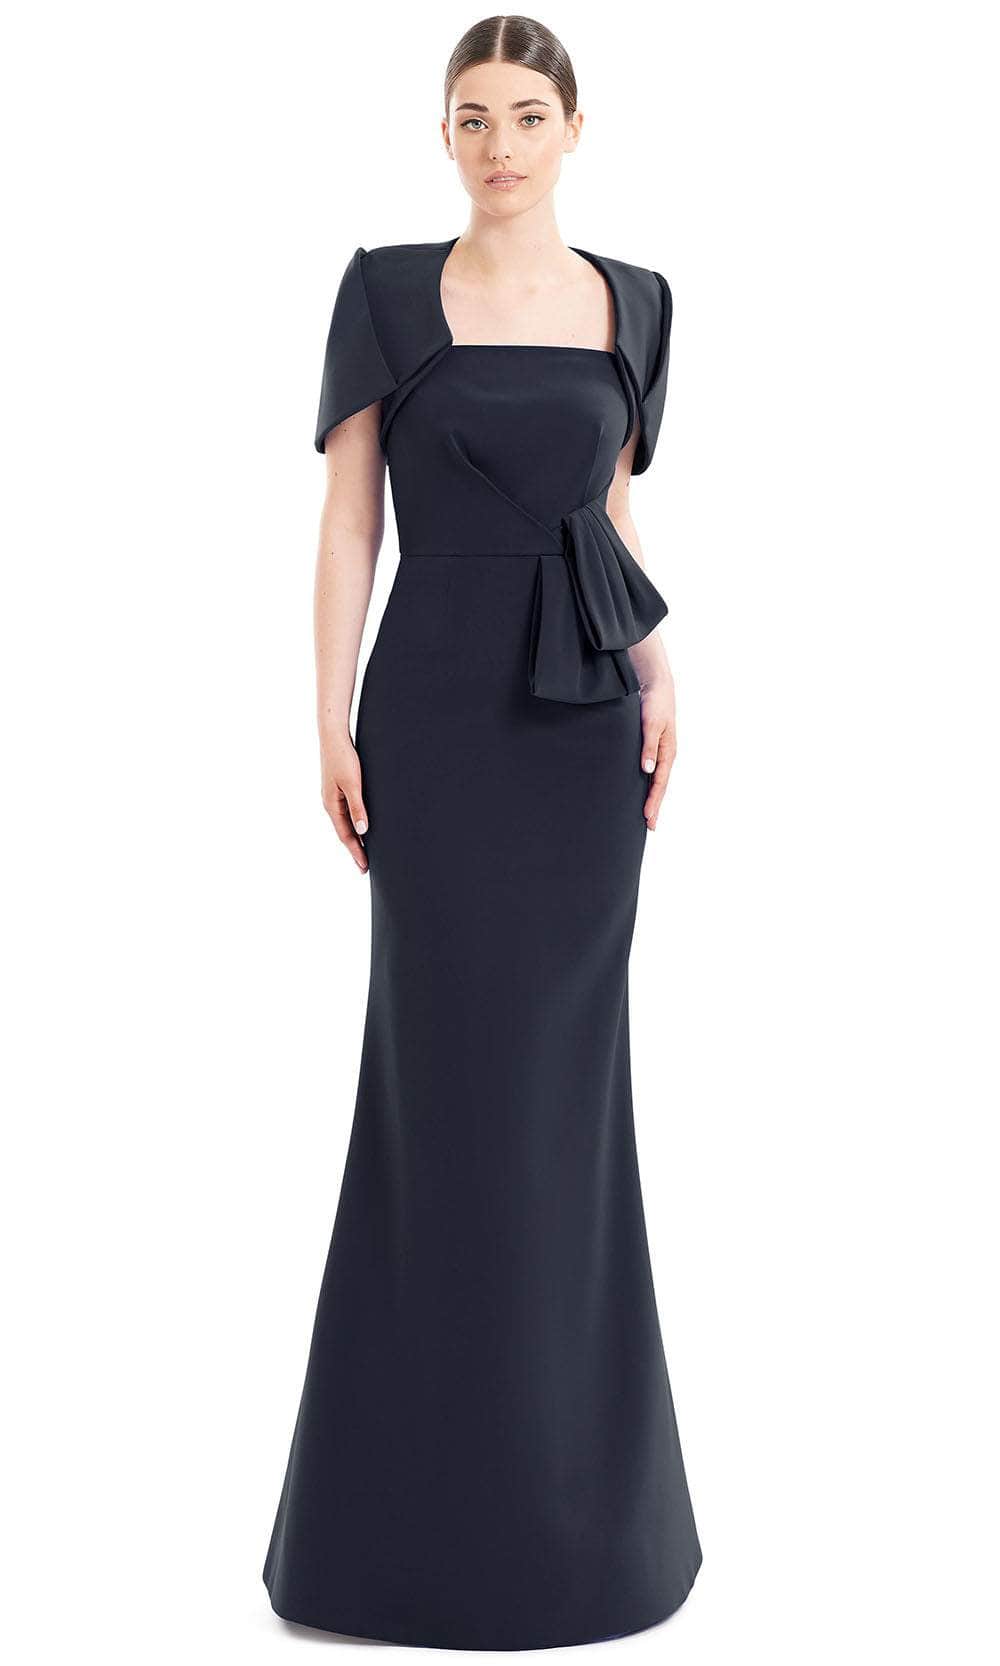 Alexander By Daymor 1656F22 - Strapless Peplum Formal Gown With Jacket Special Occasion Dress 4 / Navy